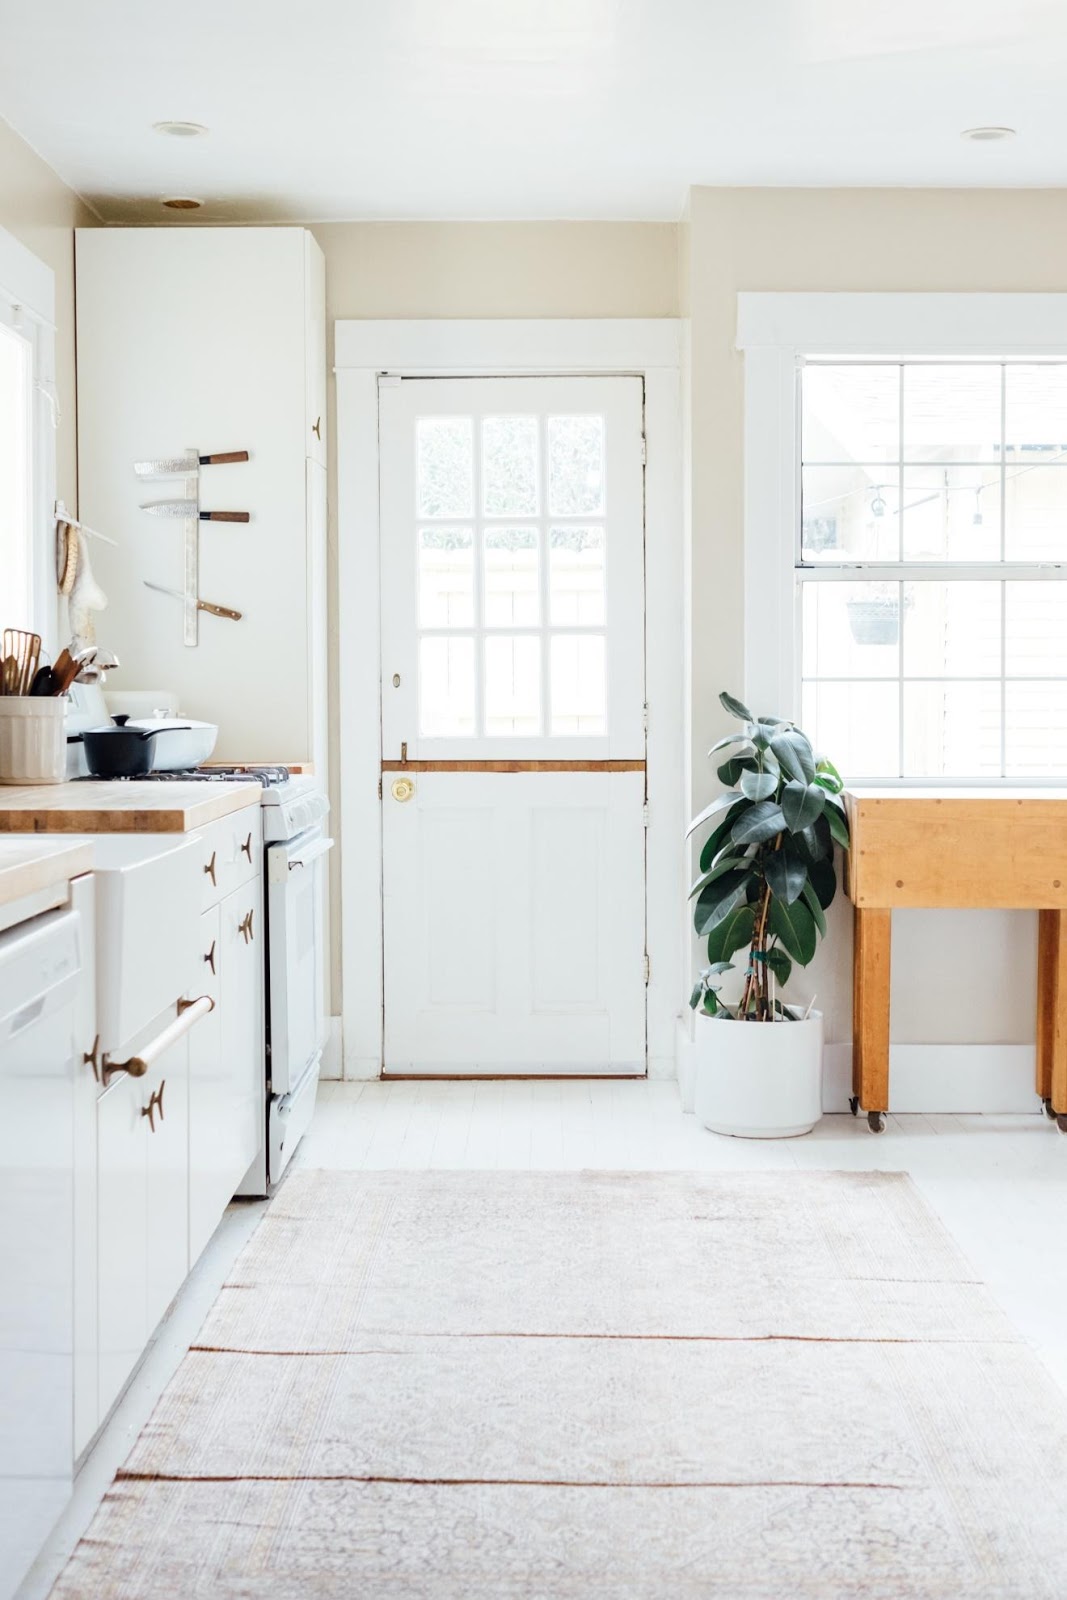 6 Benefits Of Having Natural Light In The Kitchen